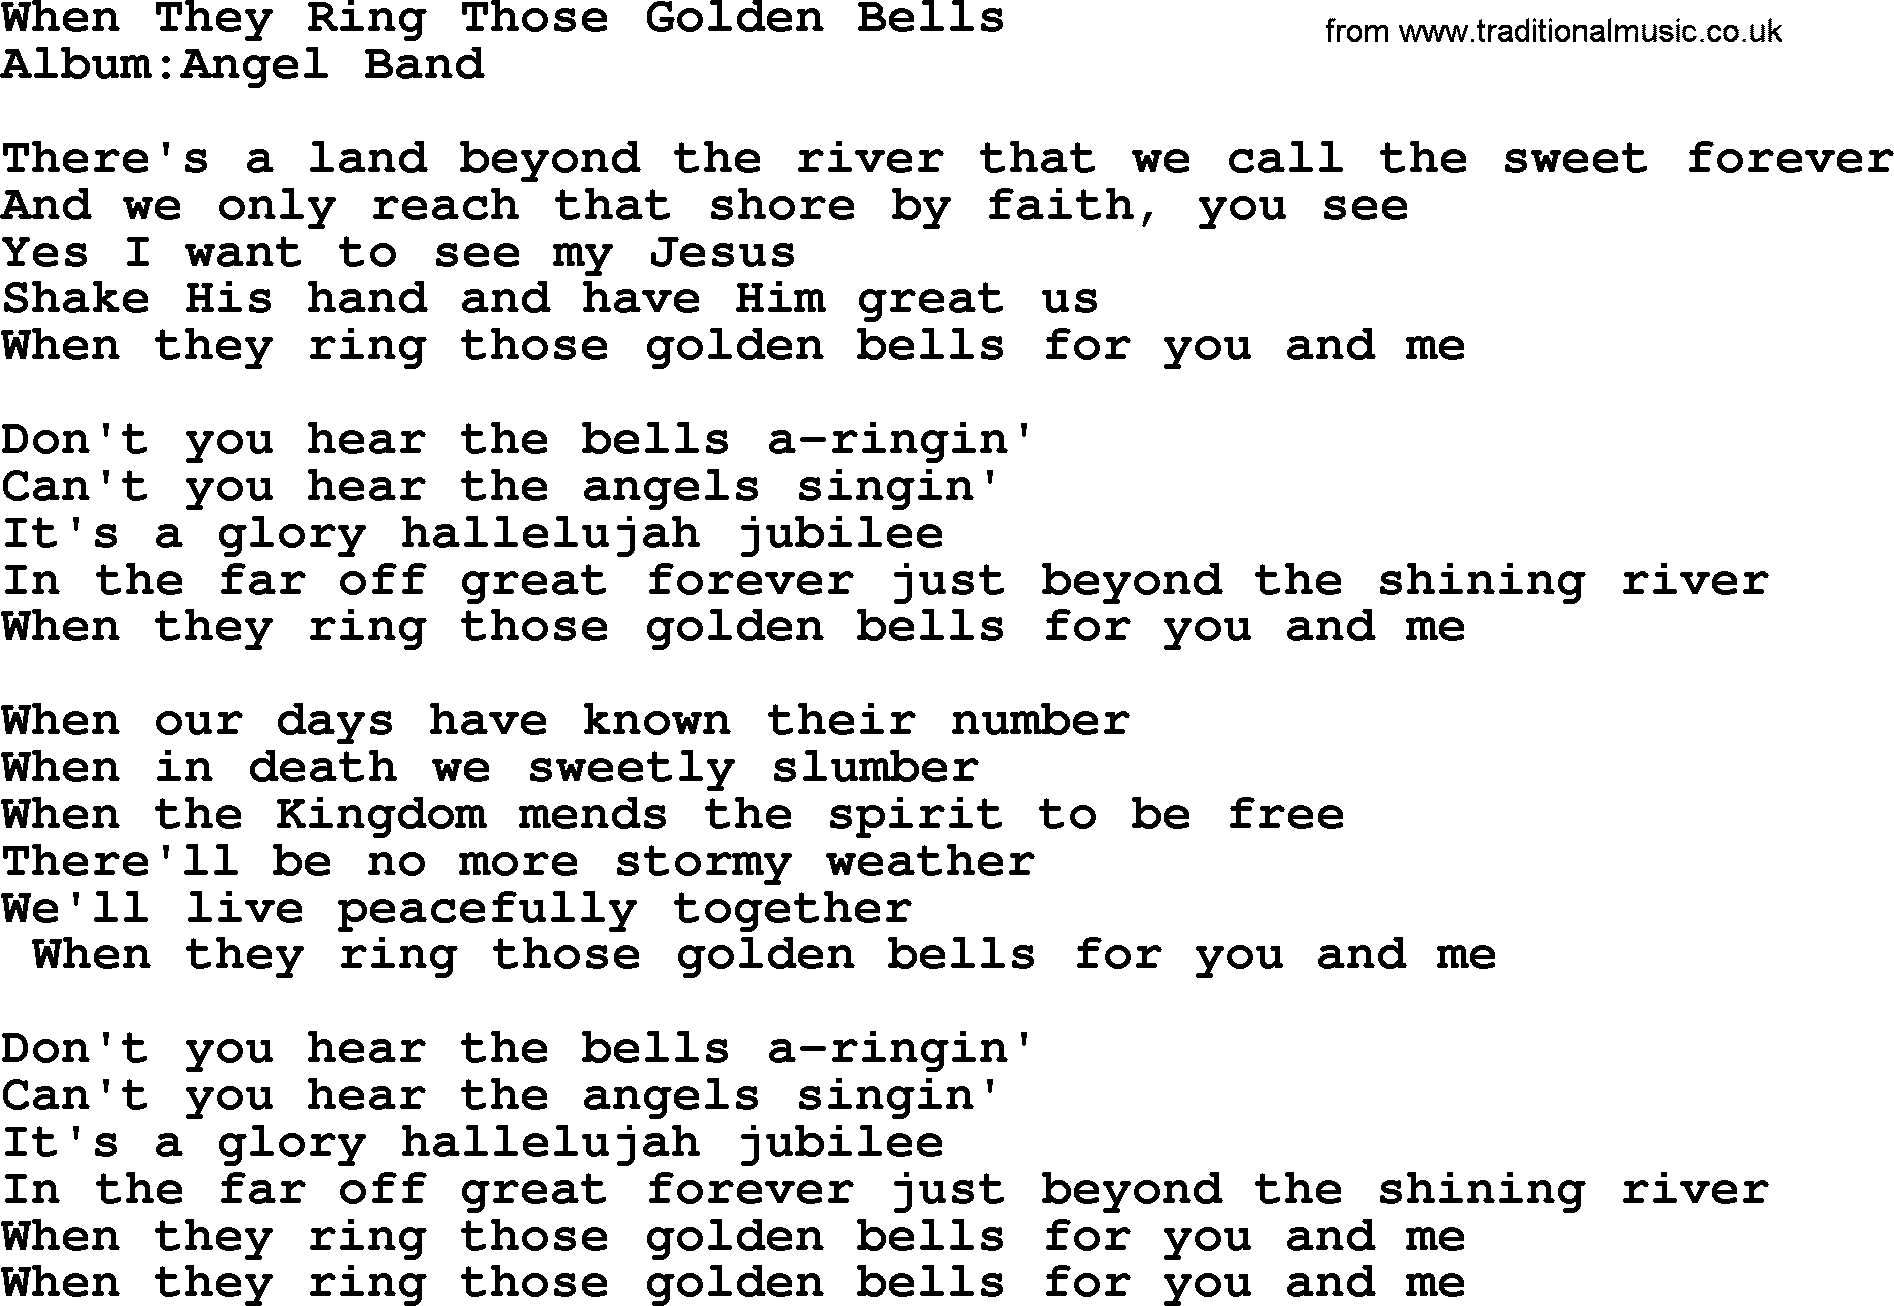 Emmylou Harris song: When They Ring Those Golden Bells lyrics